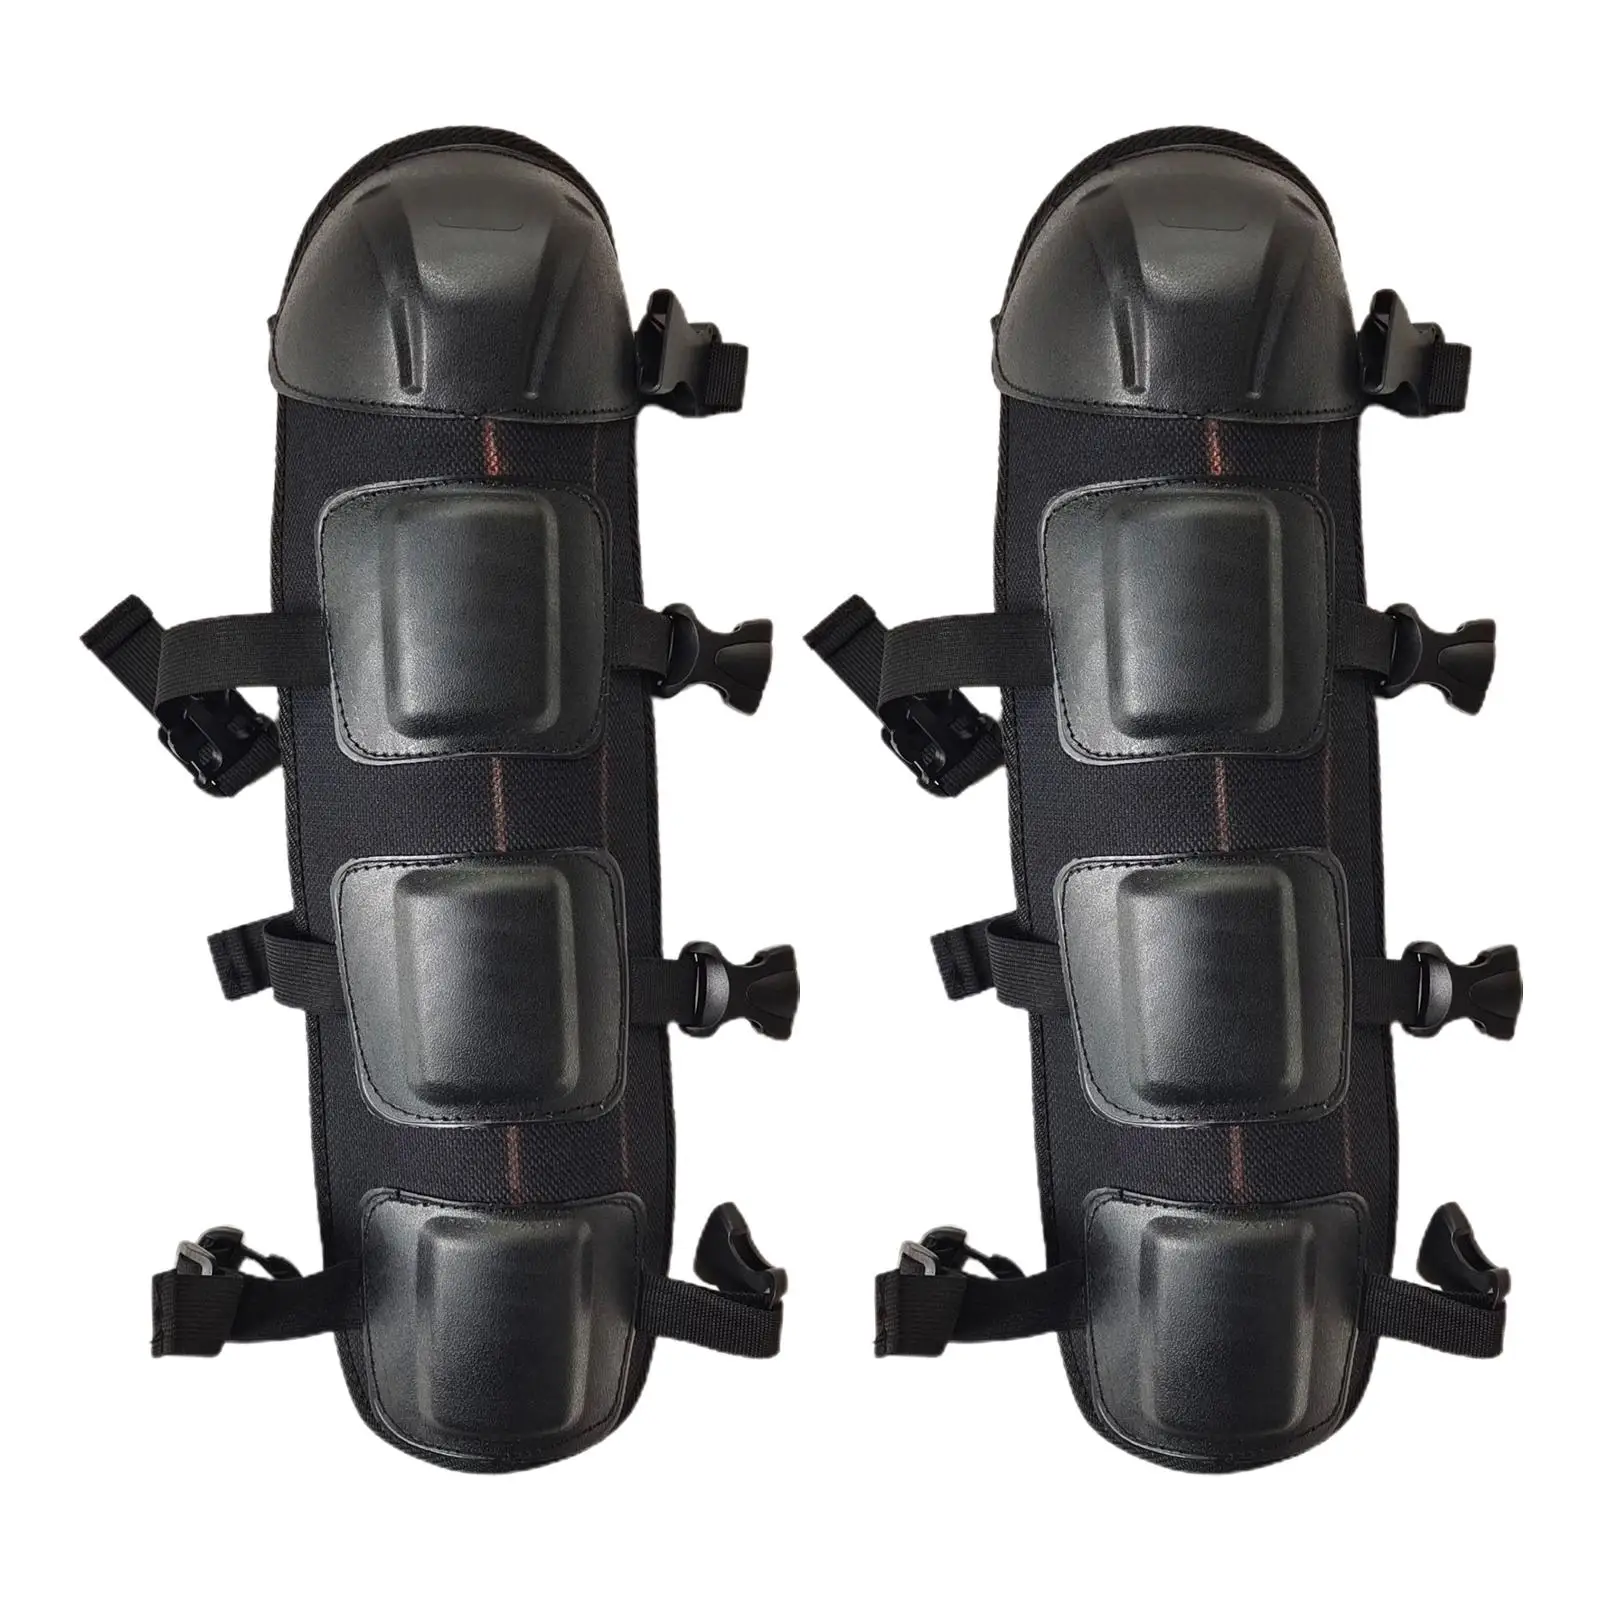 Work Knee Pads Kneelet Protective Gear Heavy Duty Adjustable Shock Cushioning Motorcycle Bike Equipment for Work Safety Supplies